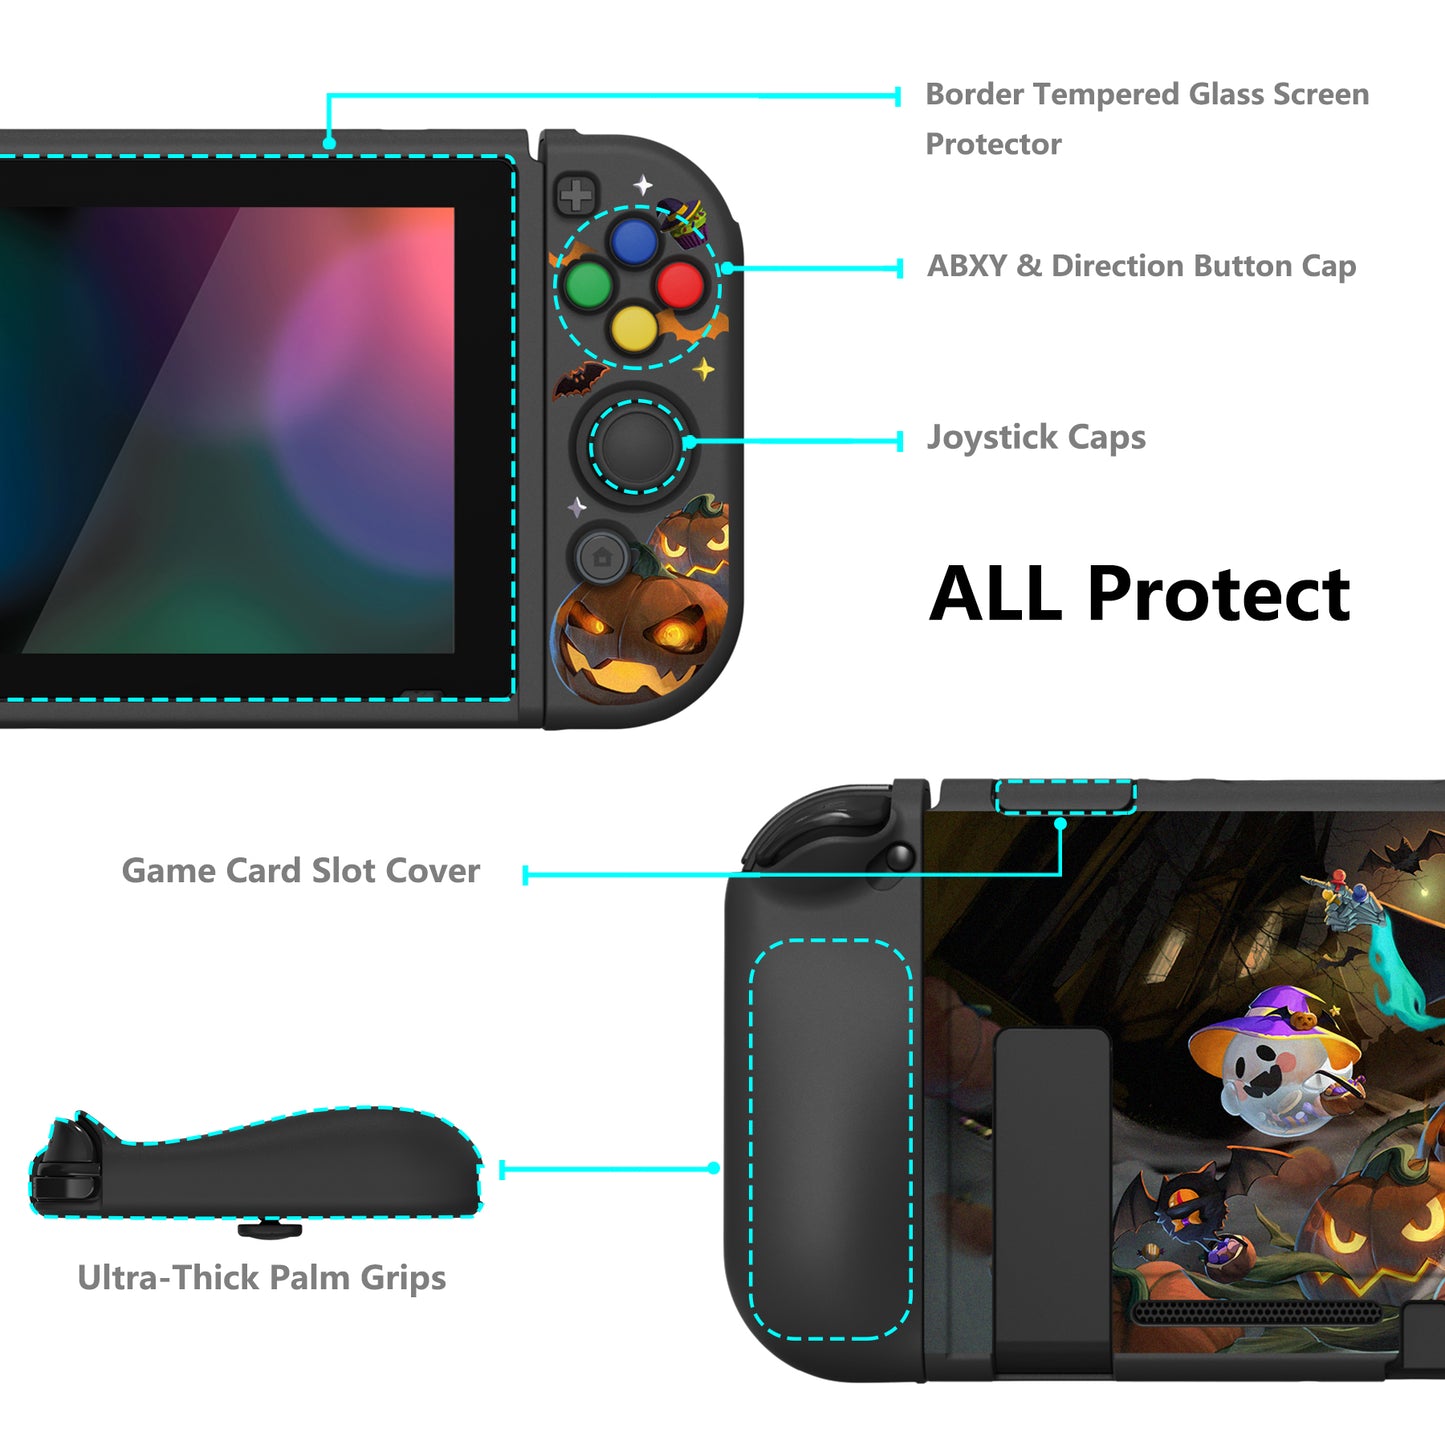 PlayVital ZealProtect Soft Protective Case for Nintendo Switch - Halloween Candy Night - RNSYV6028 playvital